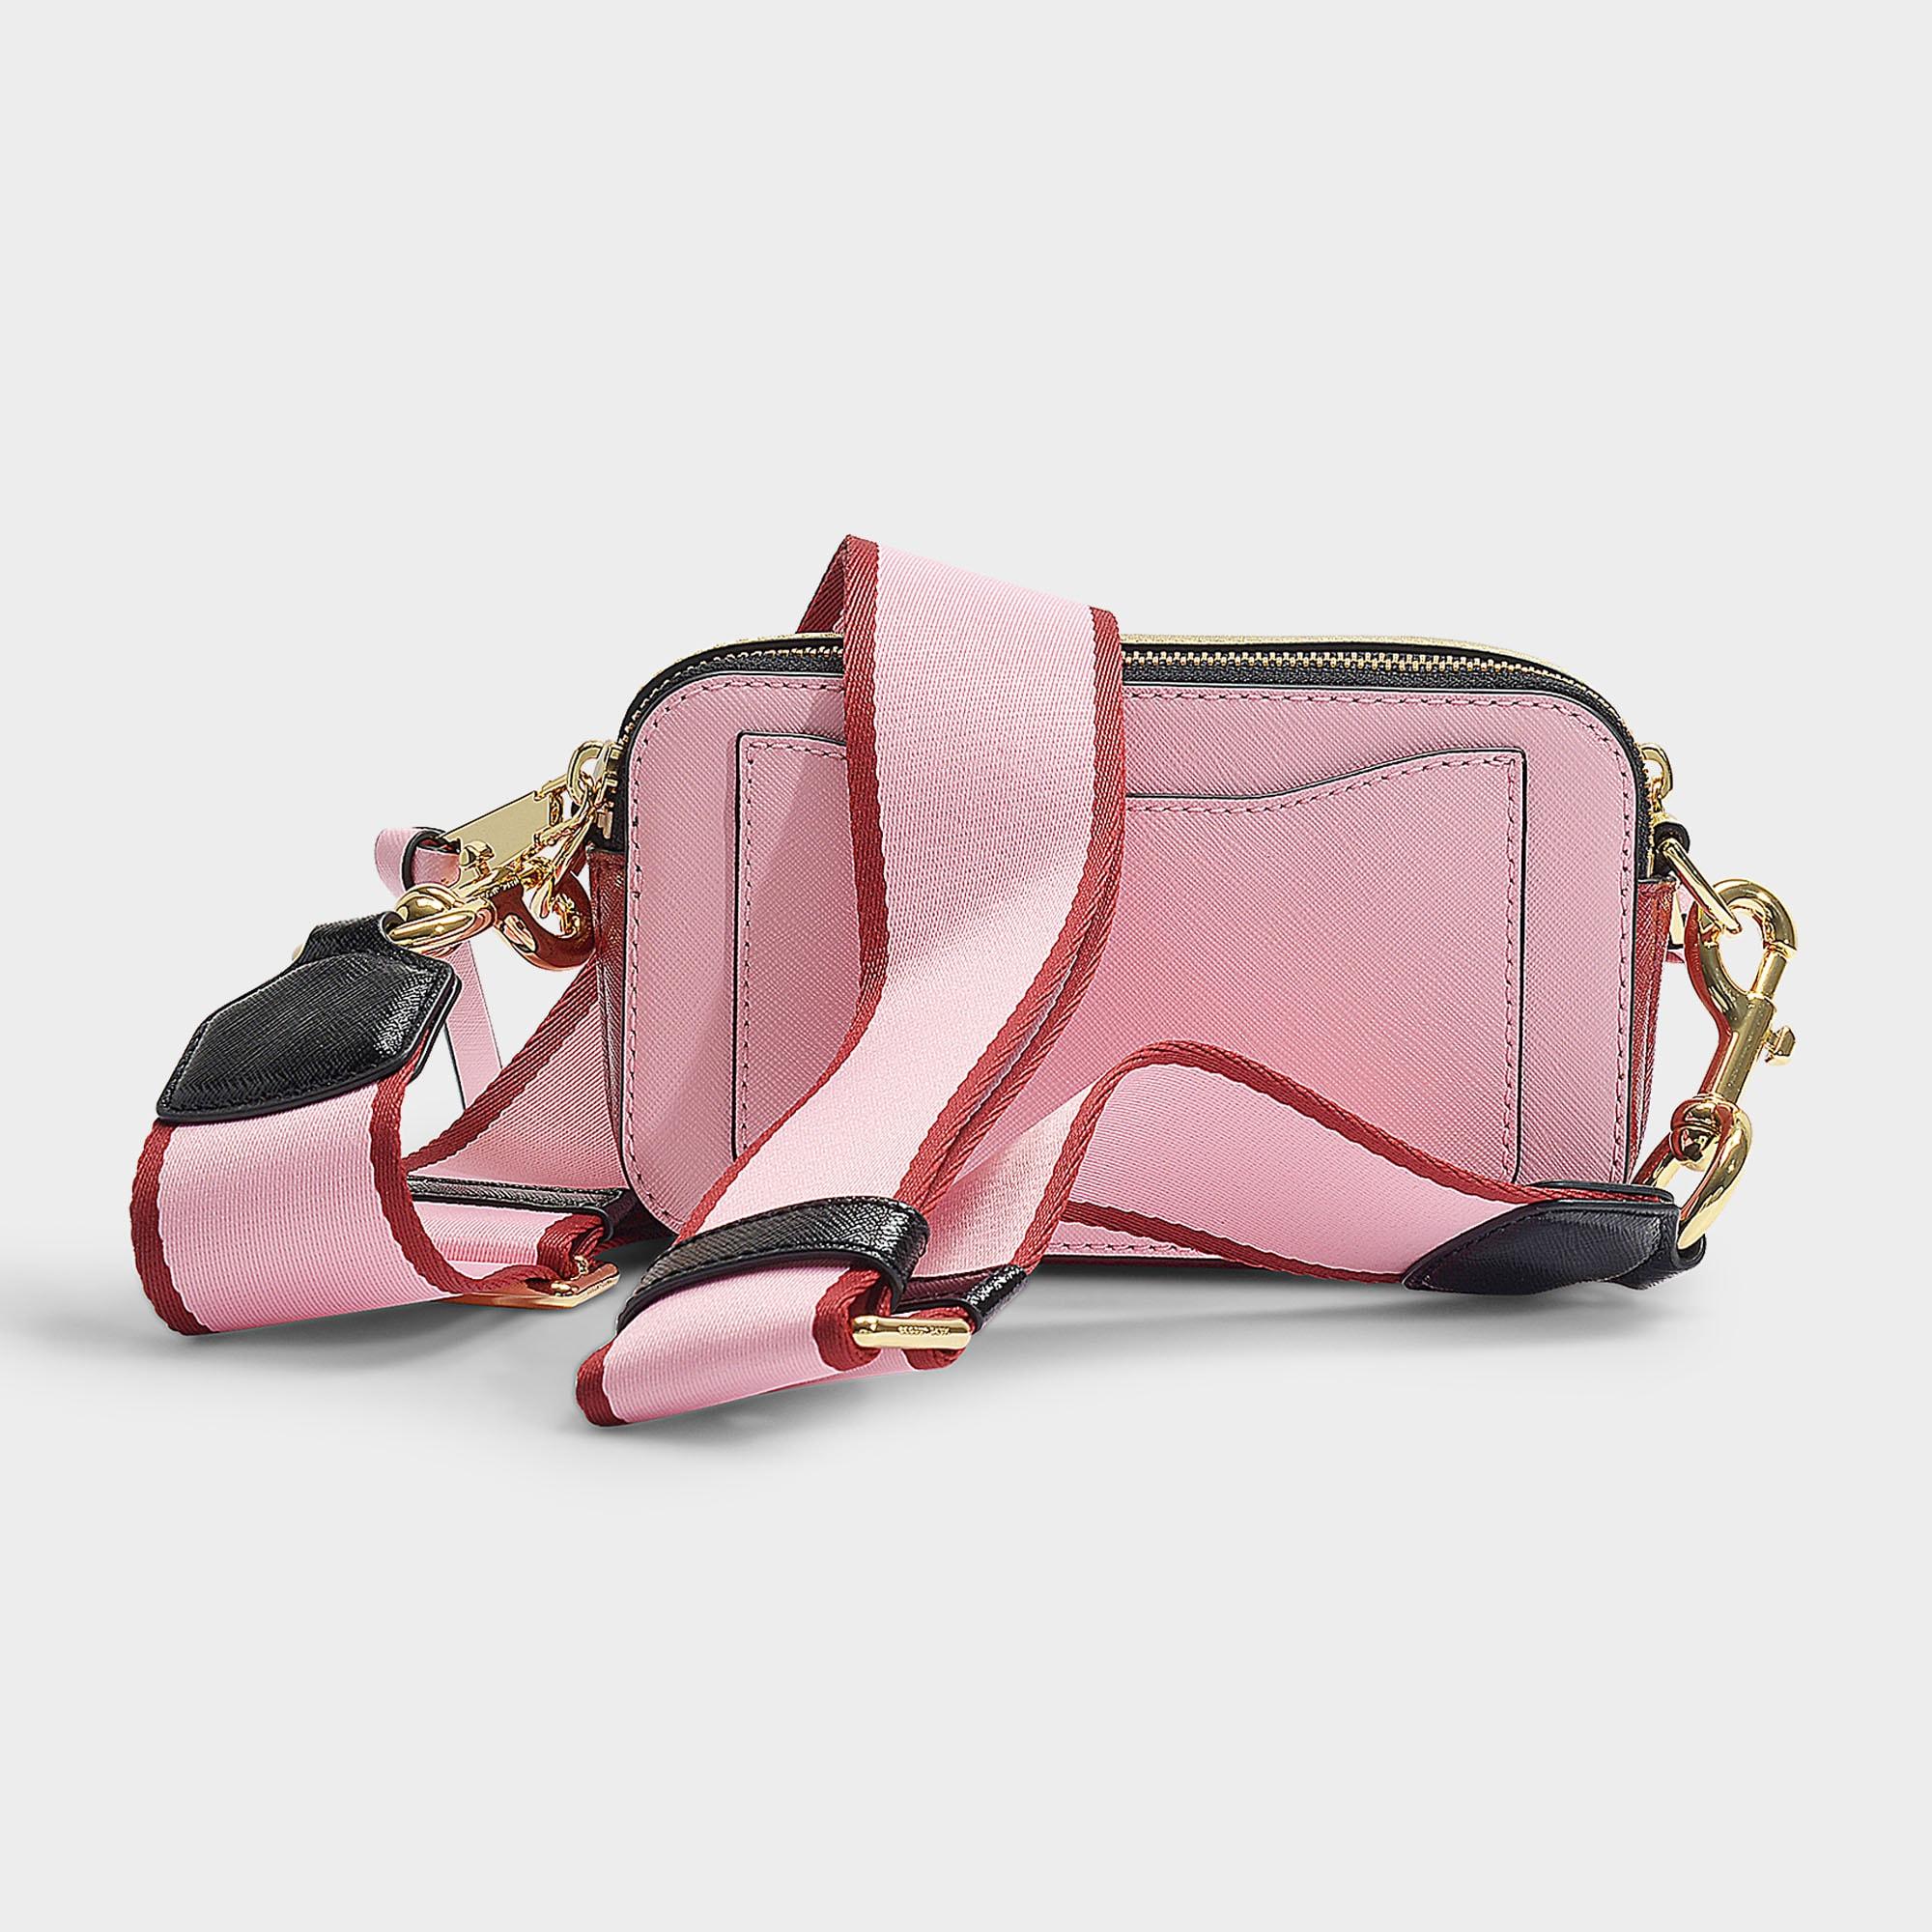 Marc Jacobs Pink and Red The Snapshot Bag